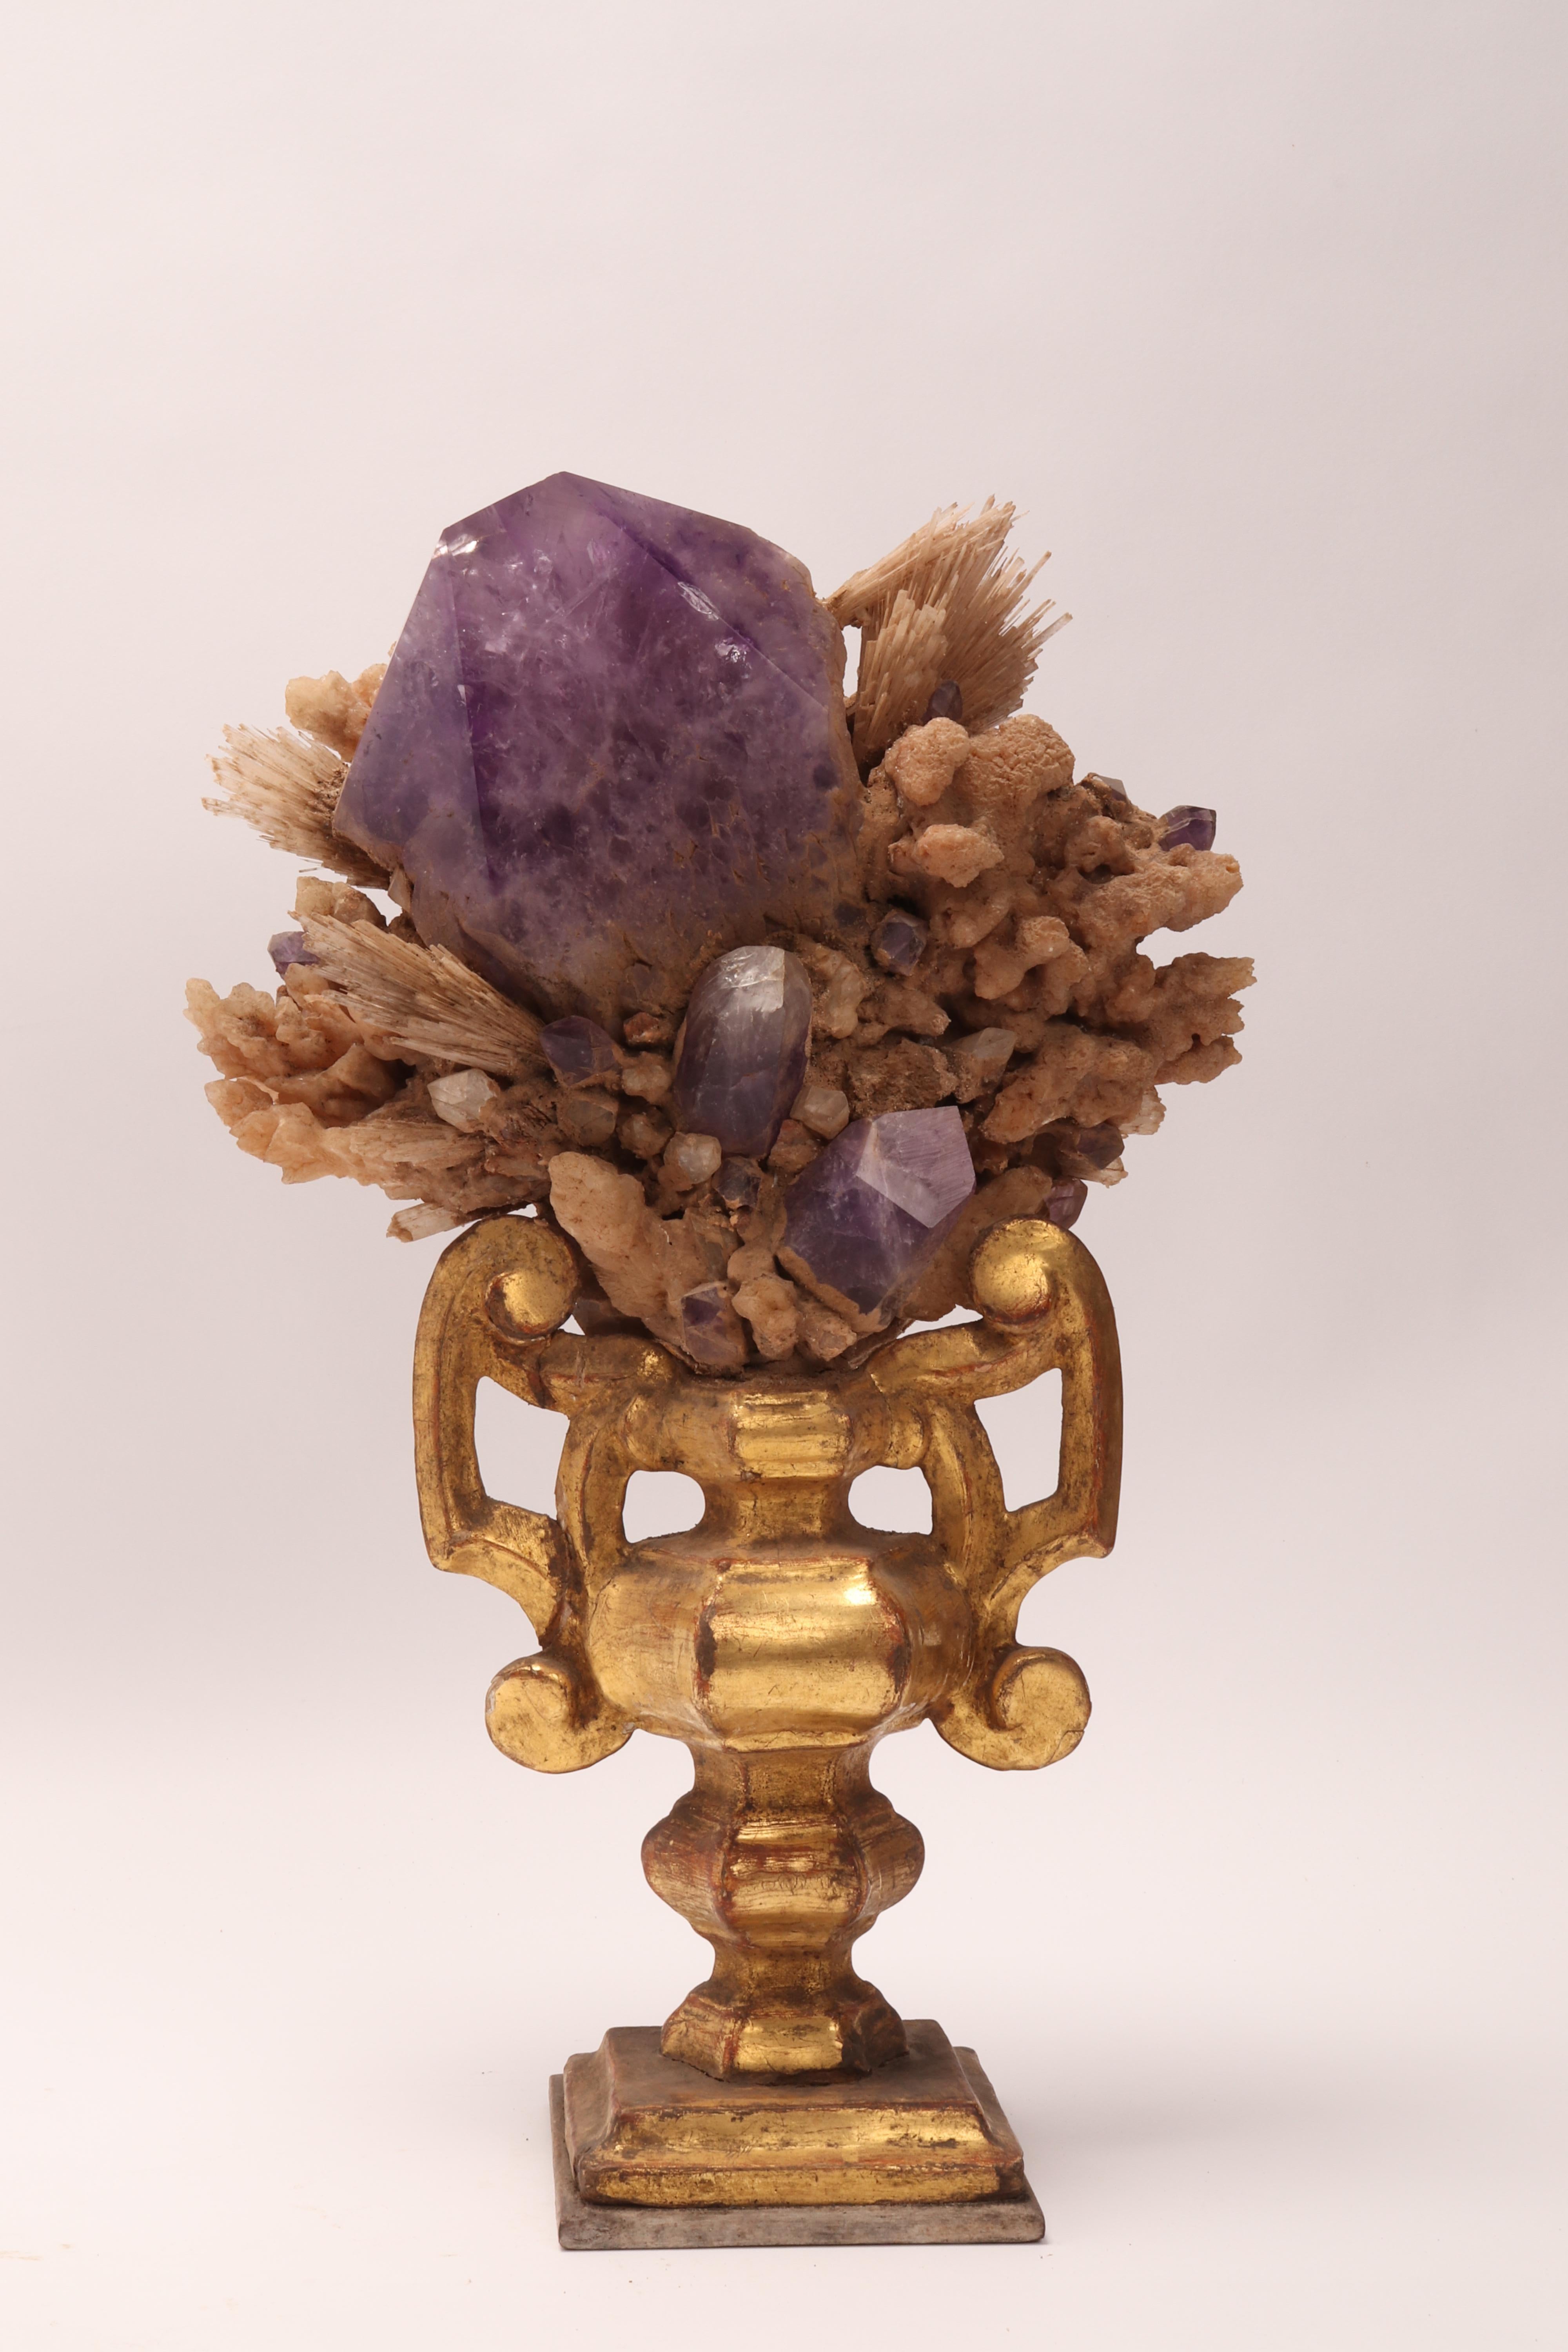 Natural Specimen Amethiste and Calcite Flowers Crystals, Italy, 1880 1